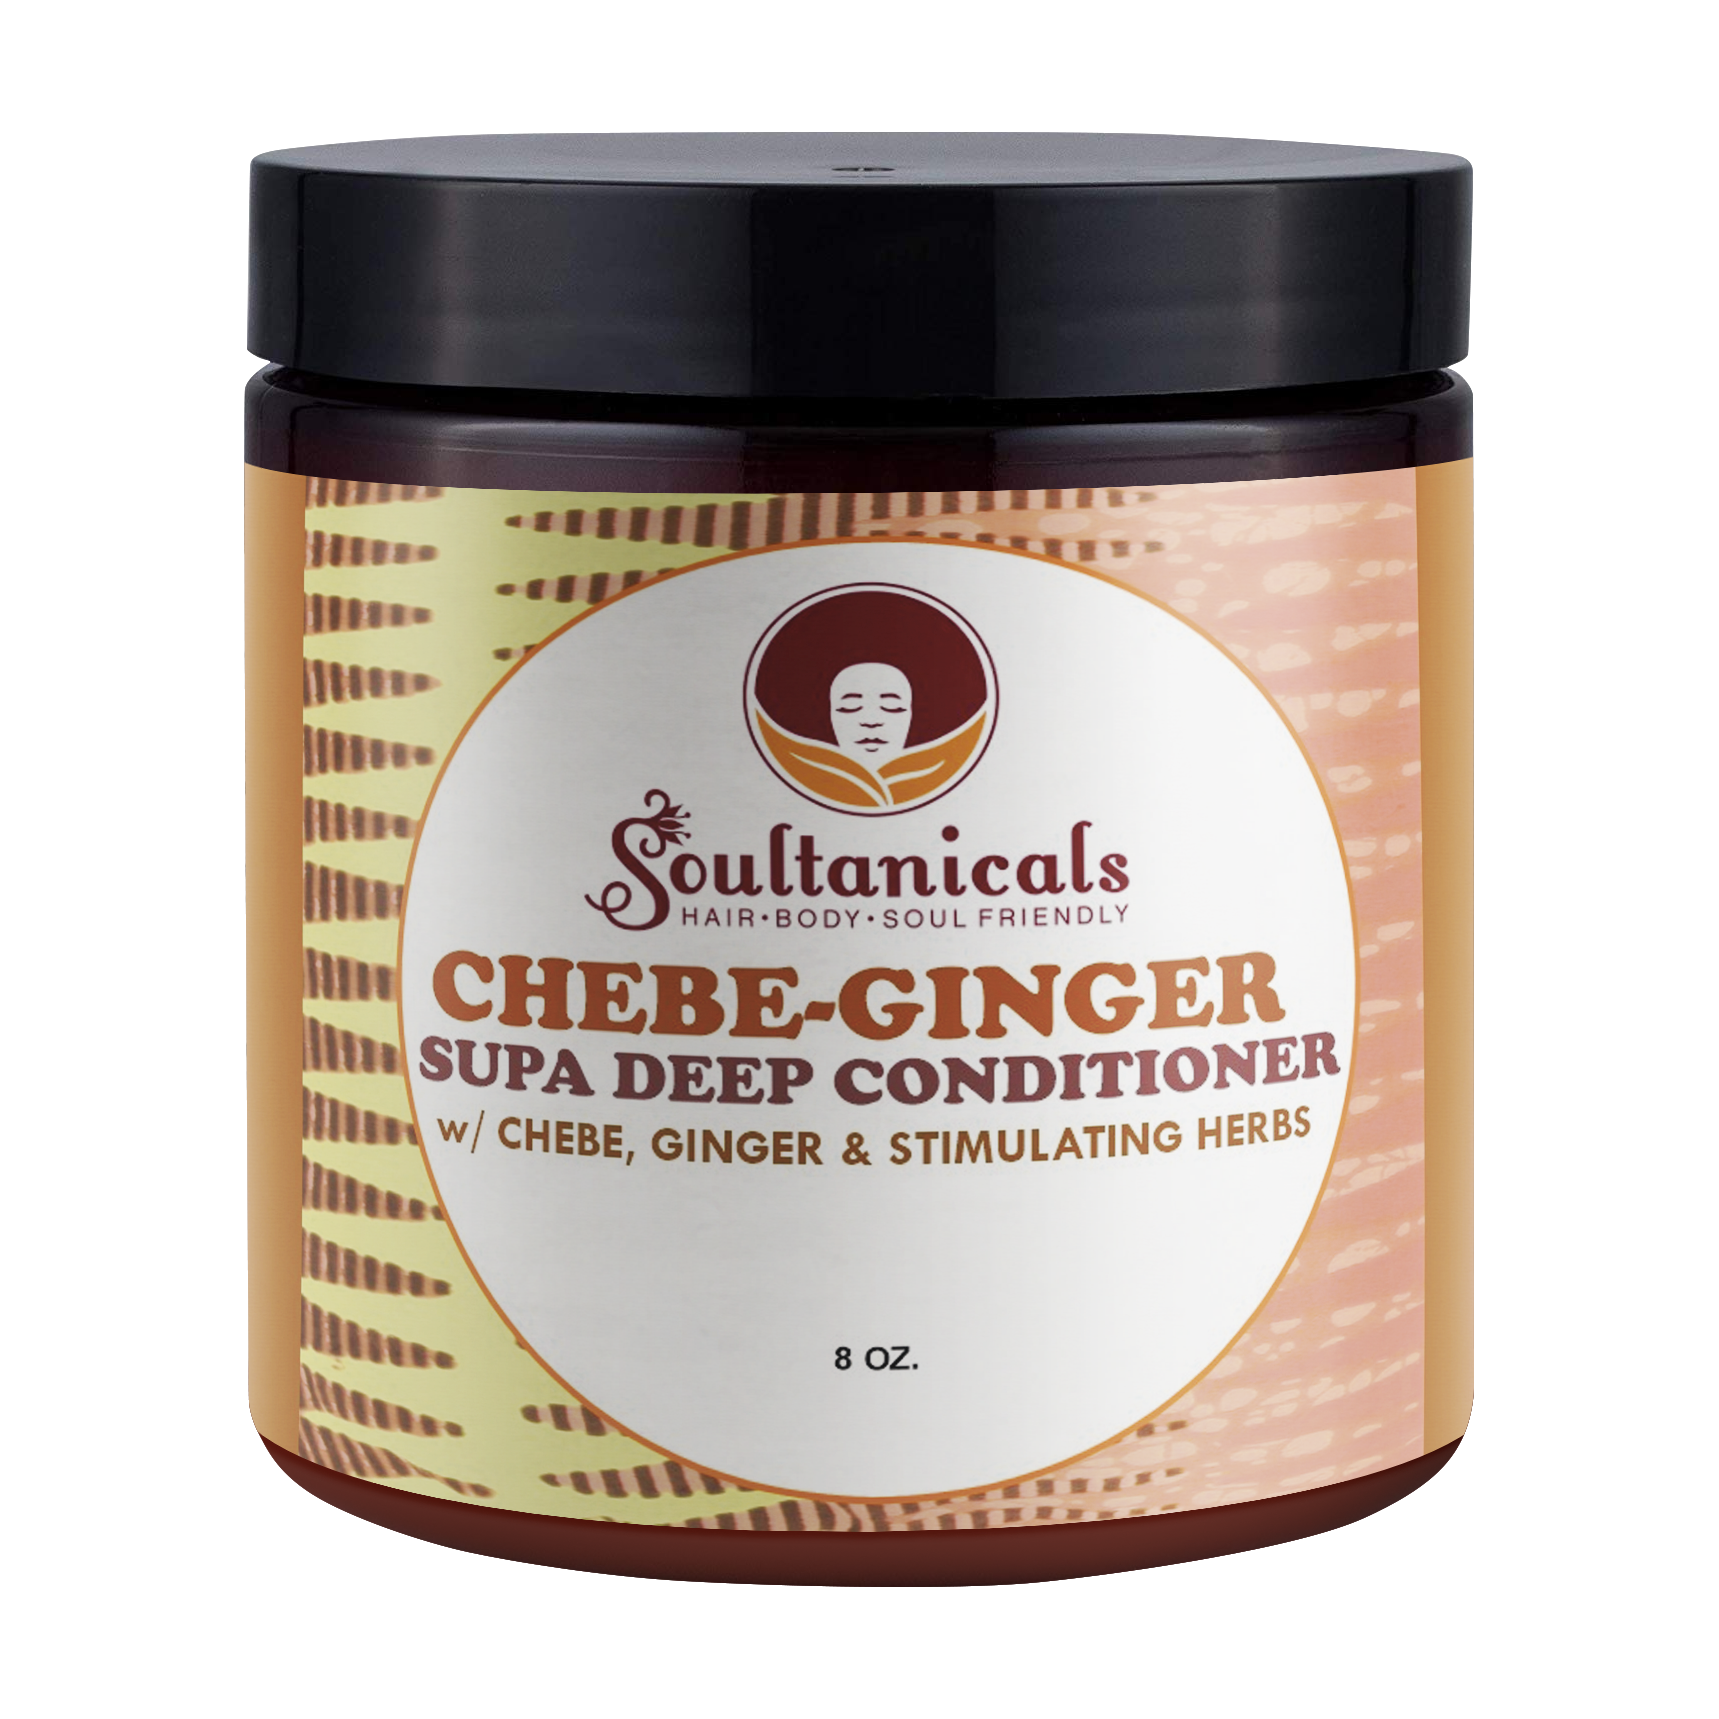 Chebe-Ginger, Supa Deep Conditioner- WHOLESALE ONLY